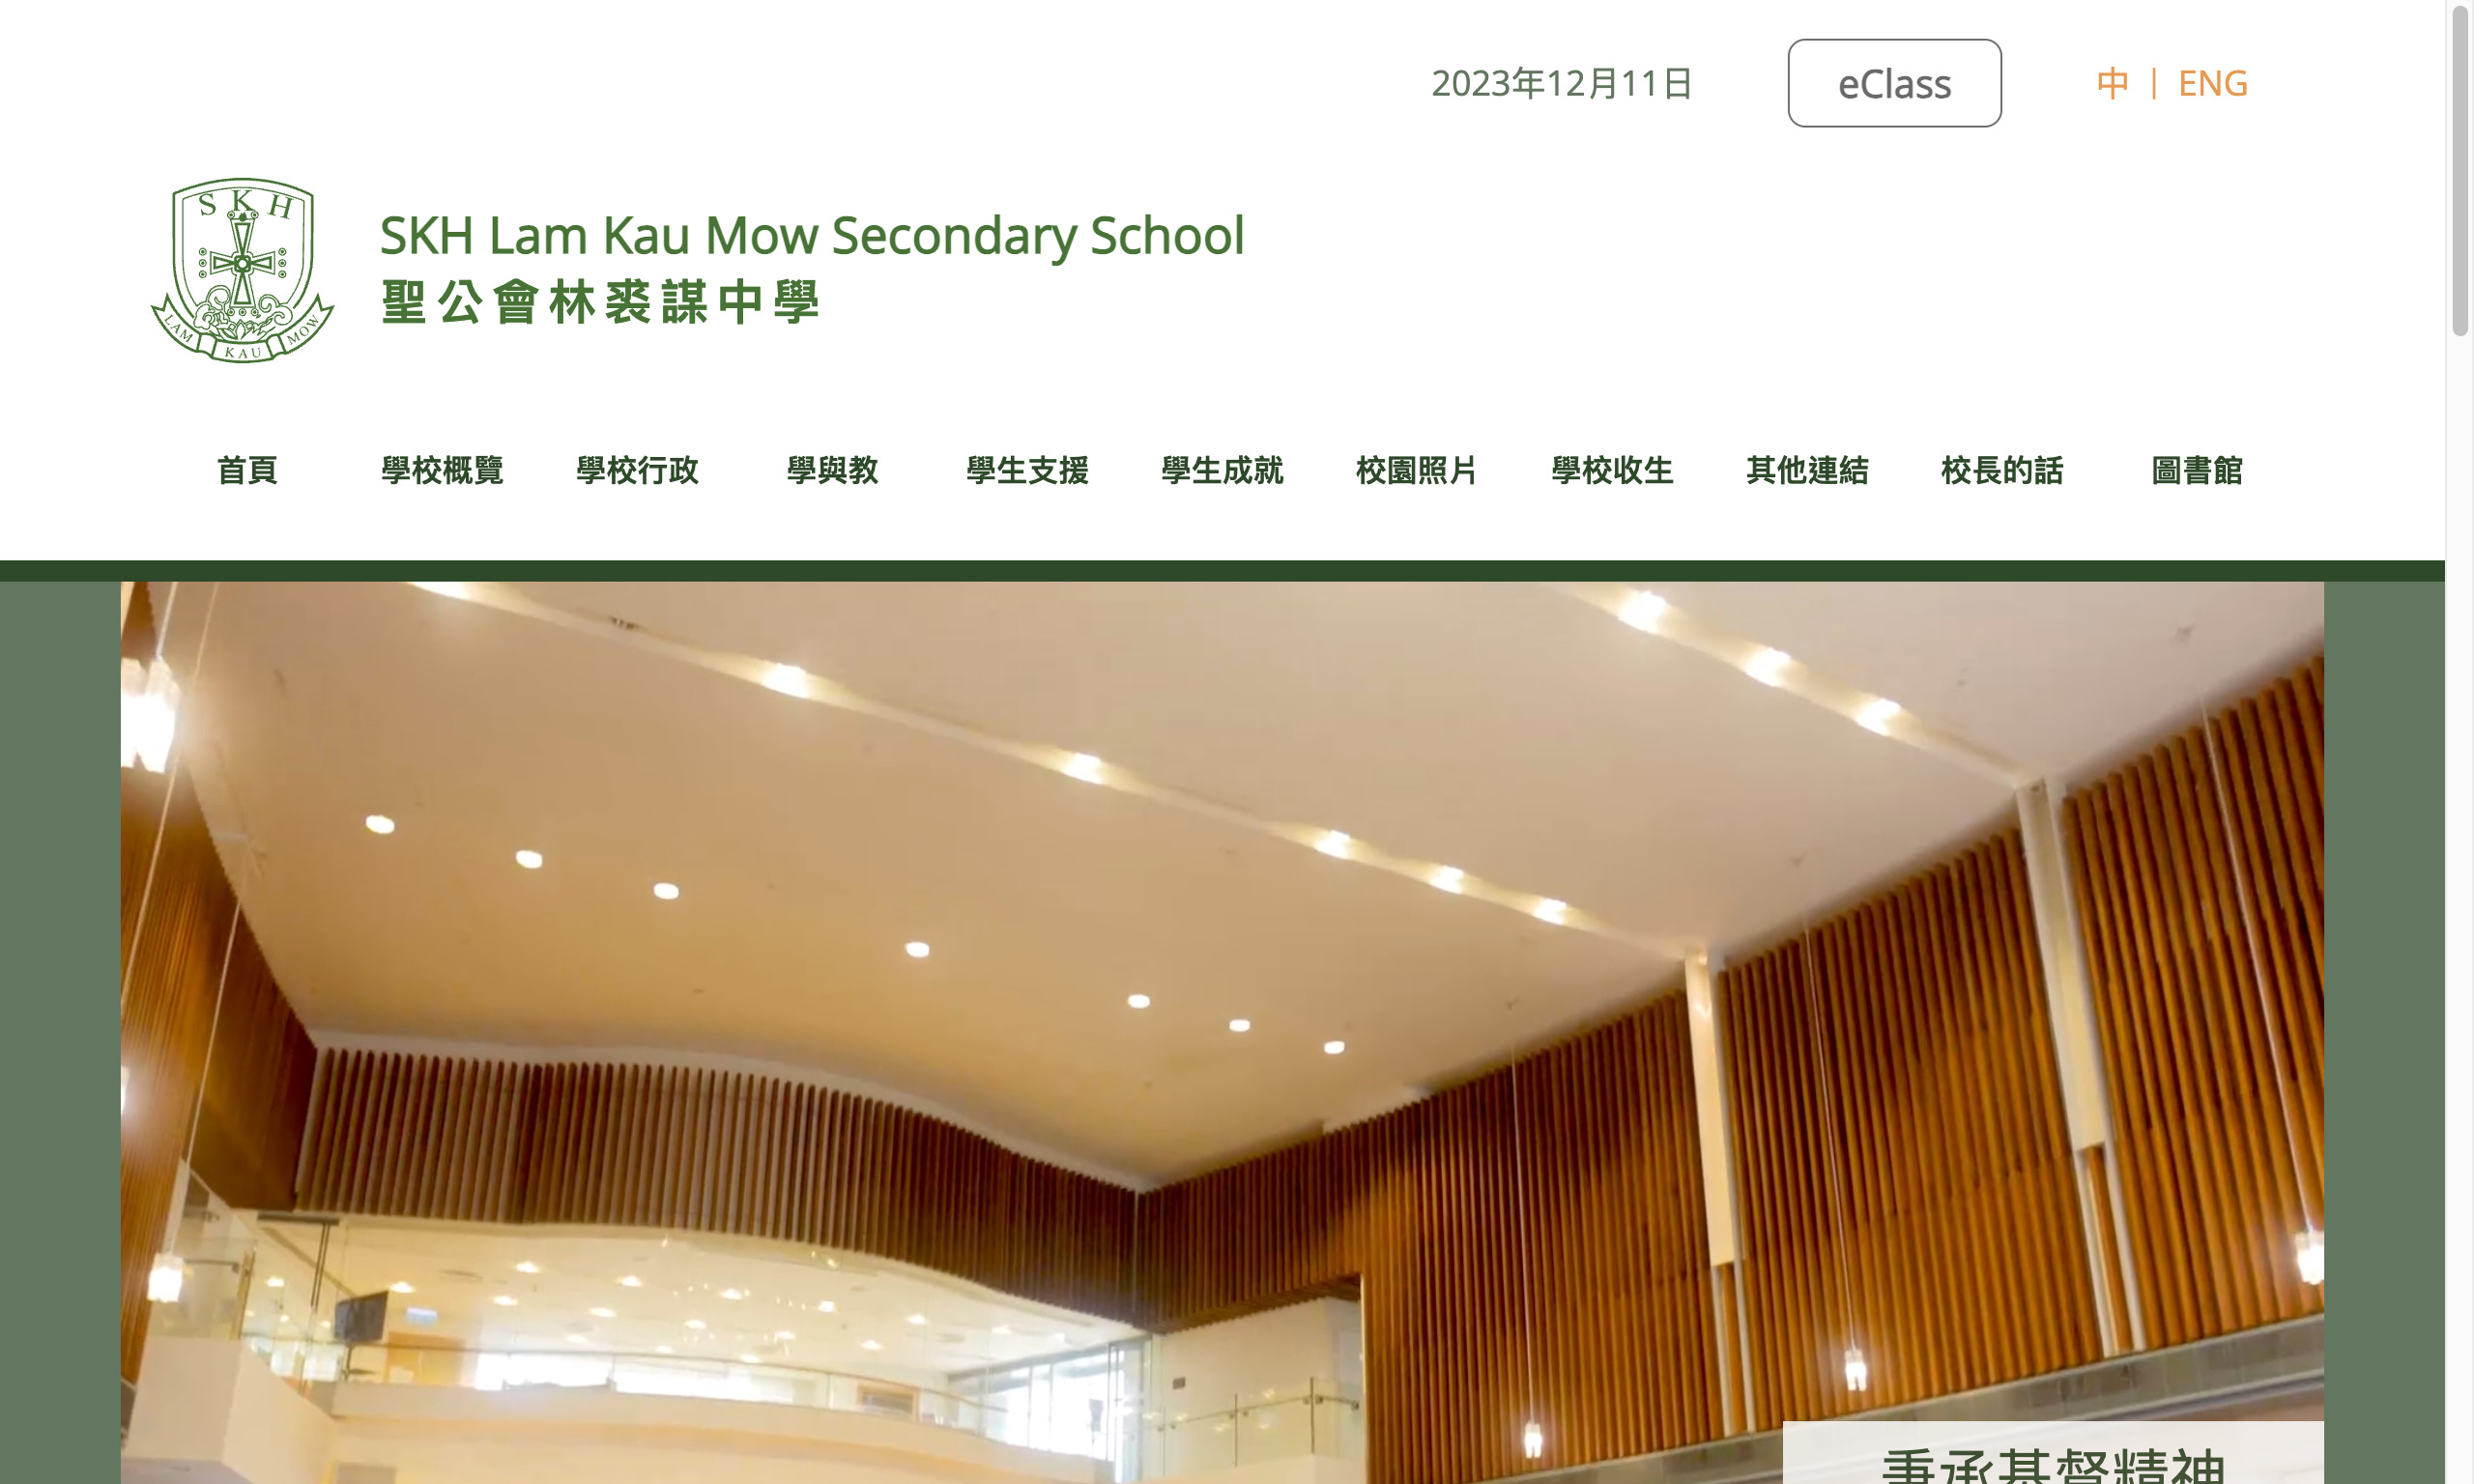 Screenshot of the Home Page of S.K.H. Lam Kau Mow Secondary School